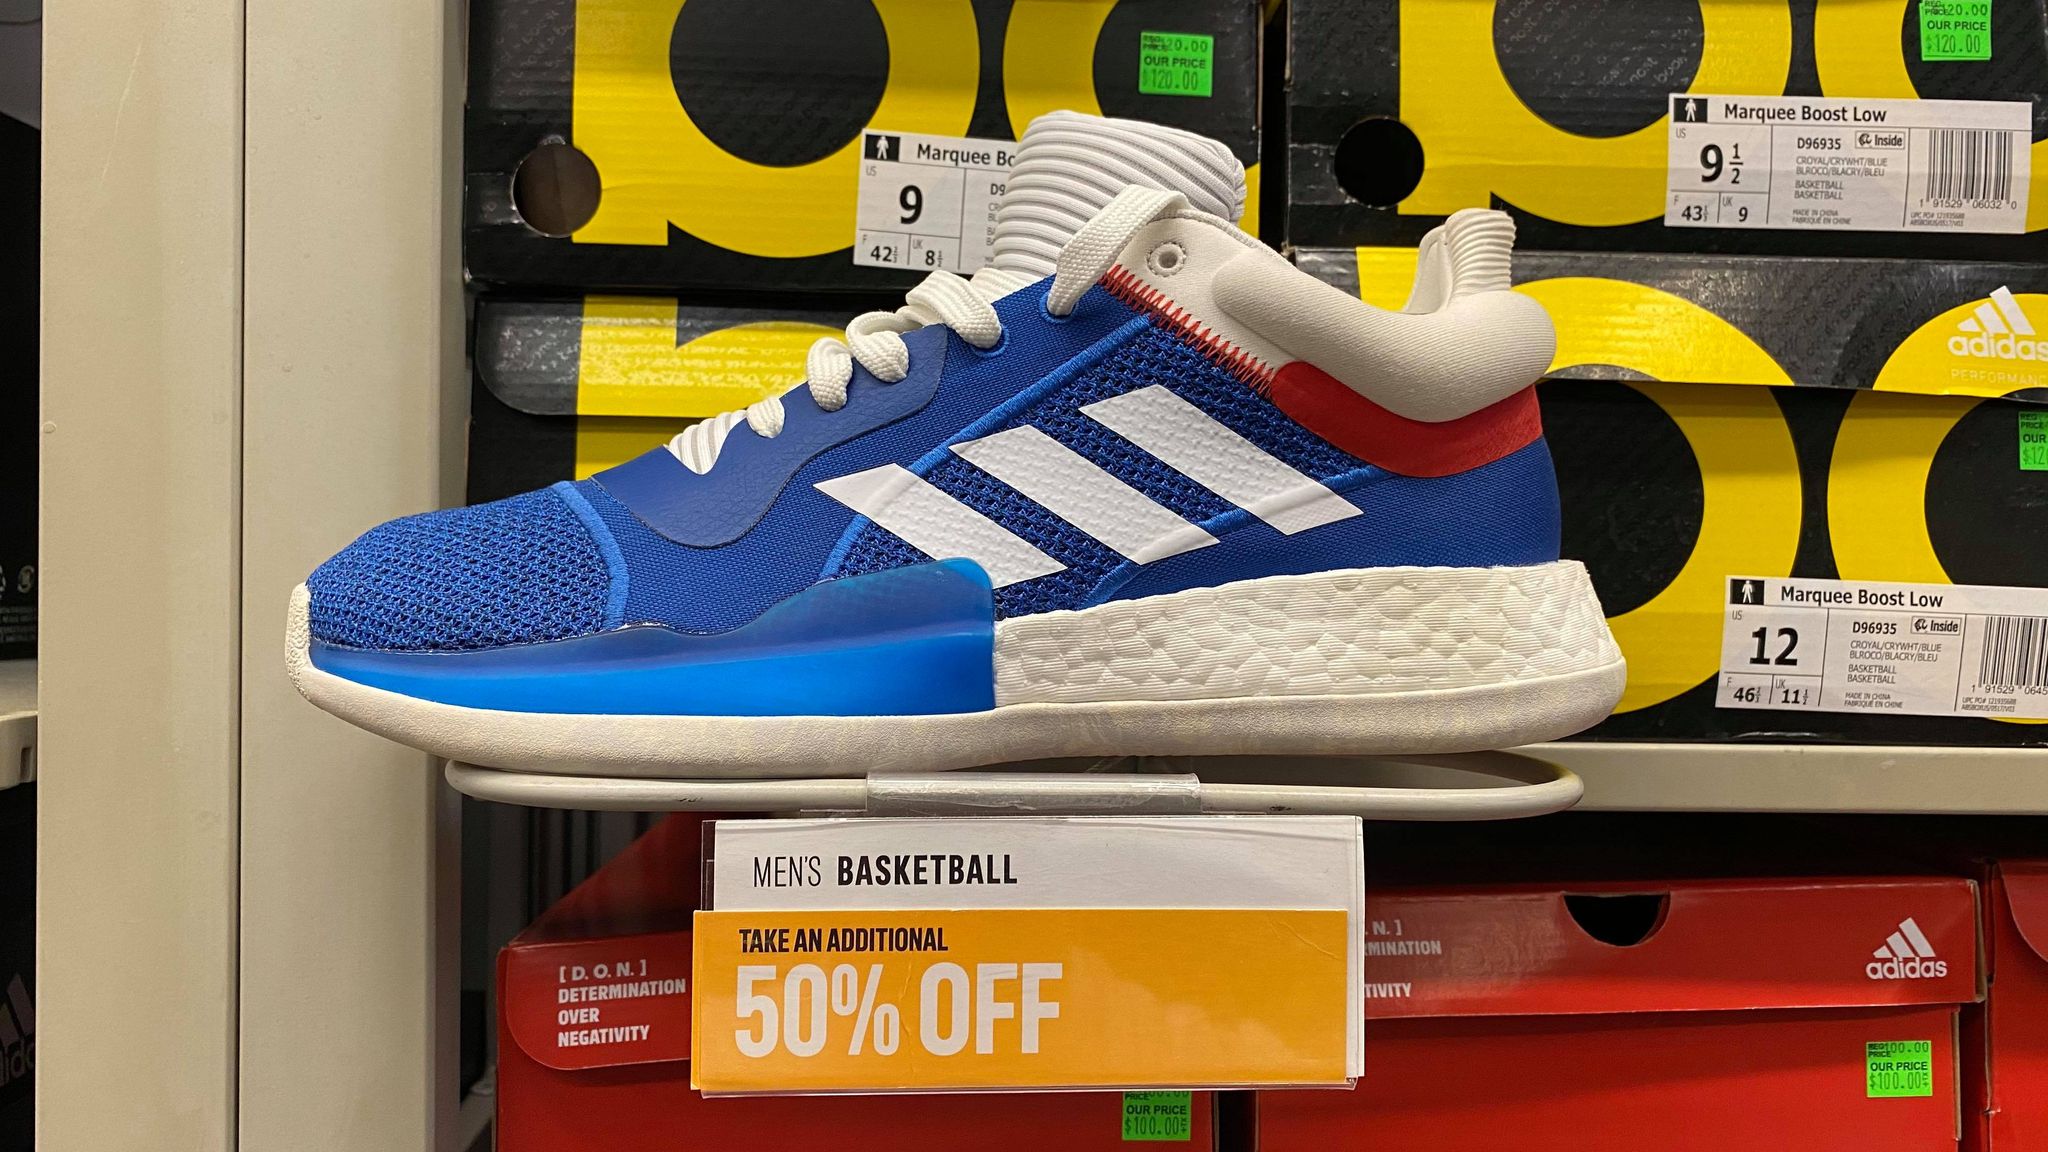 Adidas Outlet - In store off additional for creators club - The Freebie Guy®